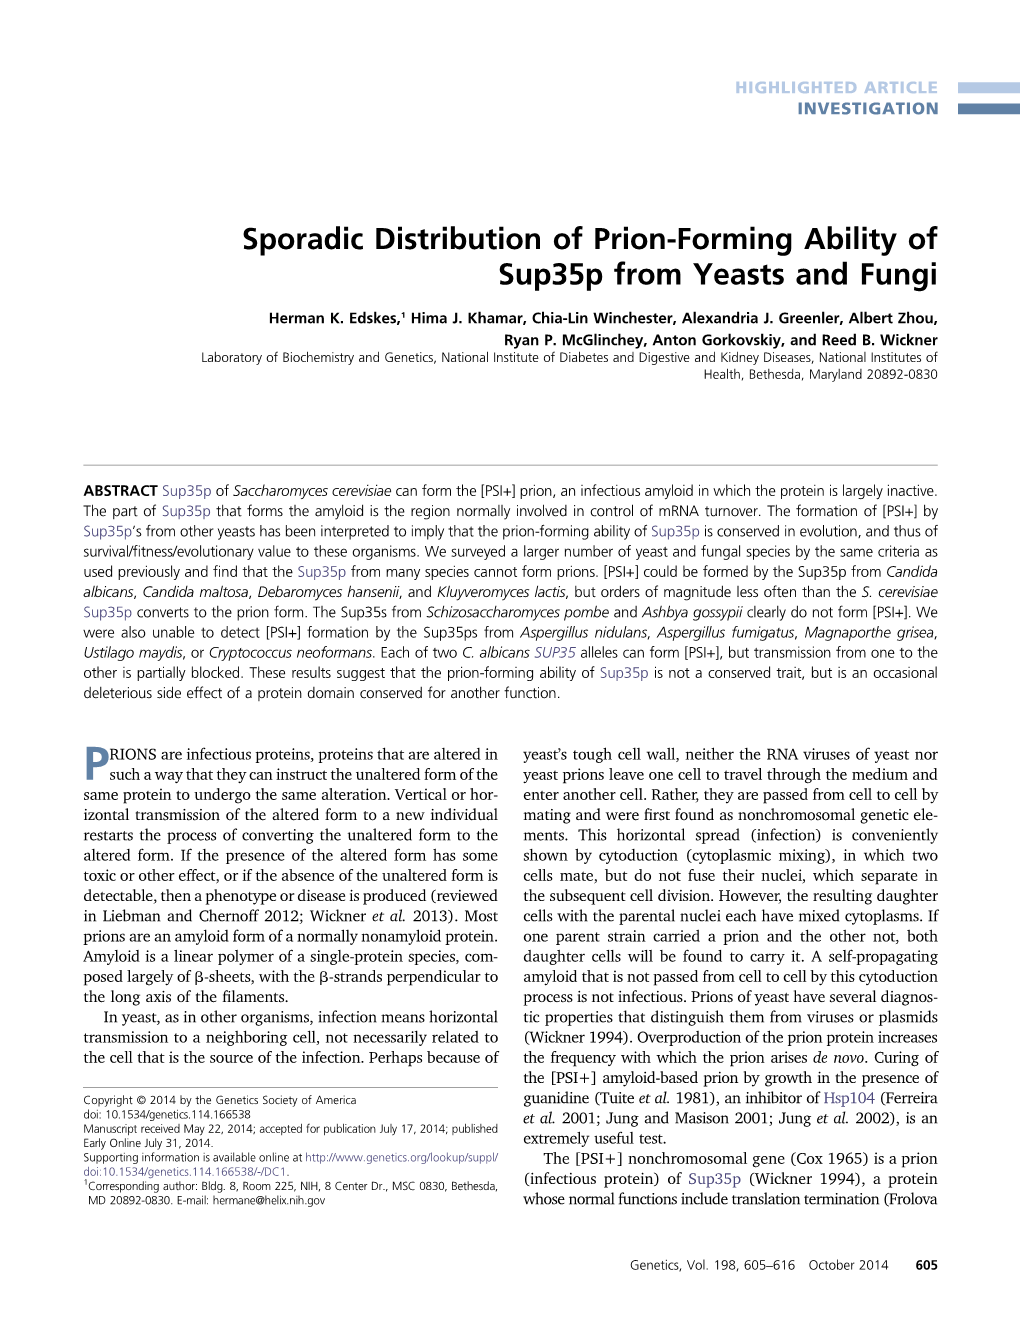 Sporadic Distribution of Prion-Forming Ability of Sup35p from Yeasts and Fungi